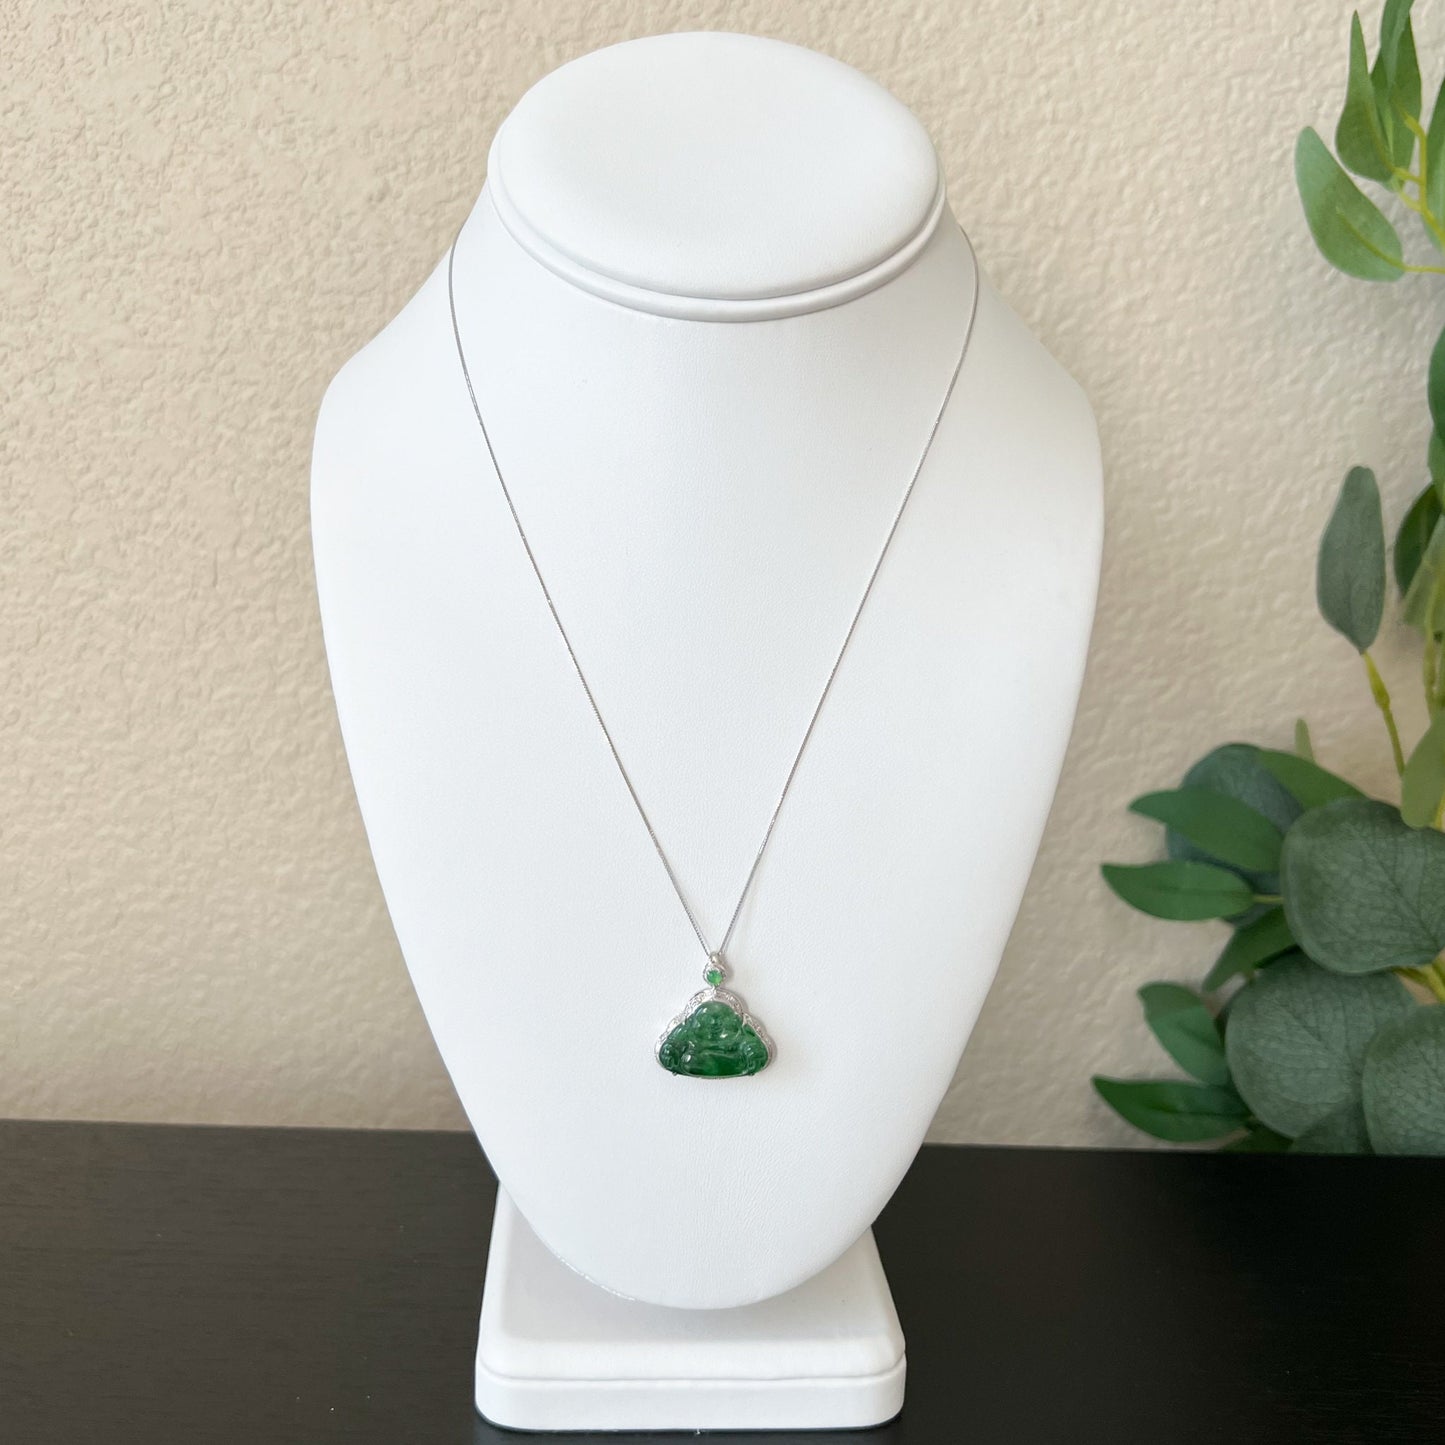 Small Green Happy Buddha, Jadeite Jade, 18K White Gold Set & Chain, Hand Carved Pendant Necklace, QY-0921-DFZB45529 - AriaDesignCollection